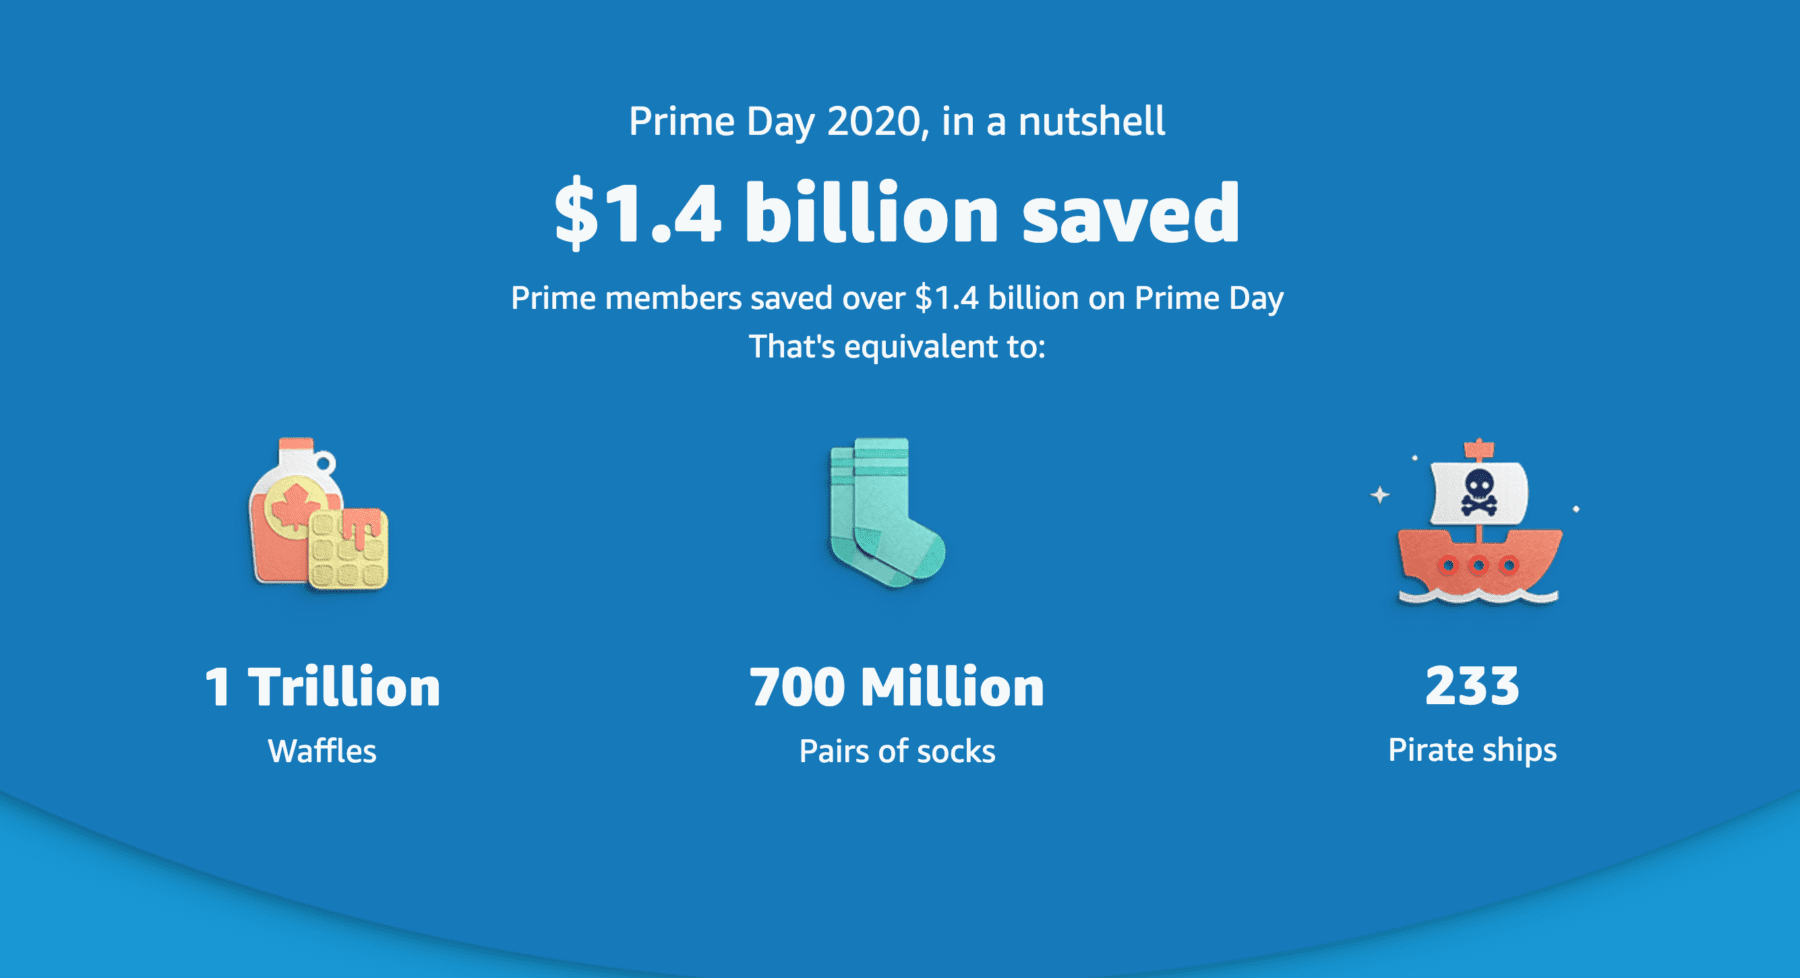 Prime Day 2020 in a nutshell